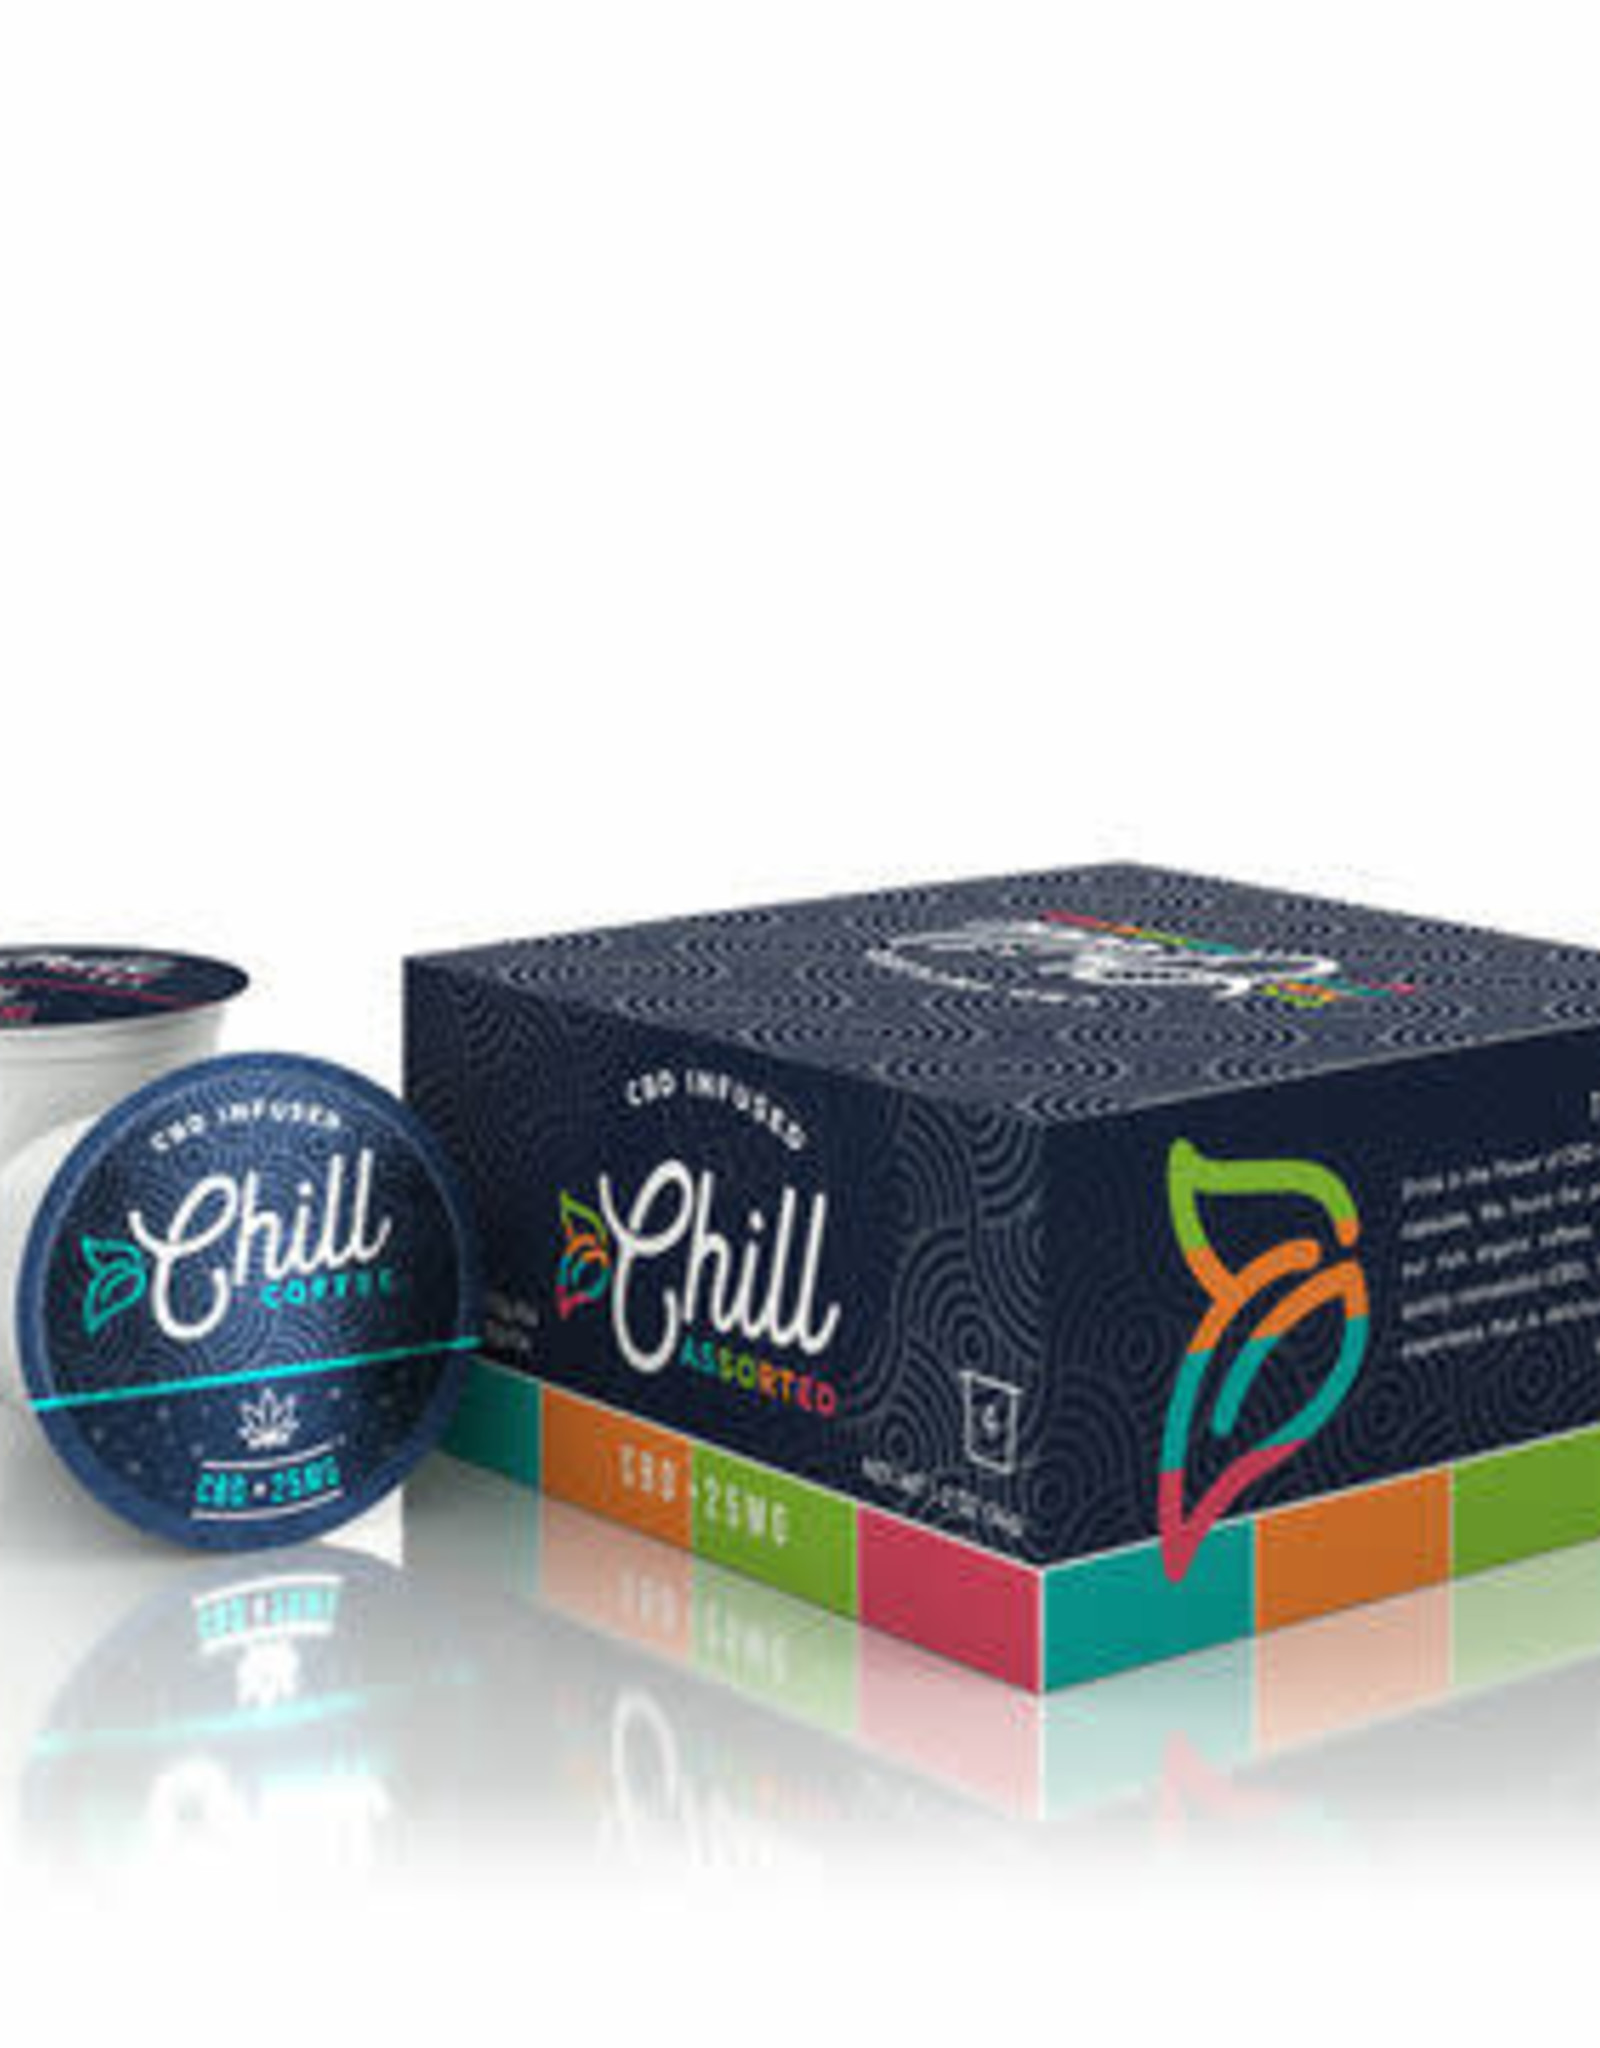 Diamond Chill Assorted K-Cups